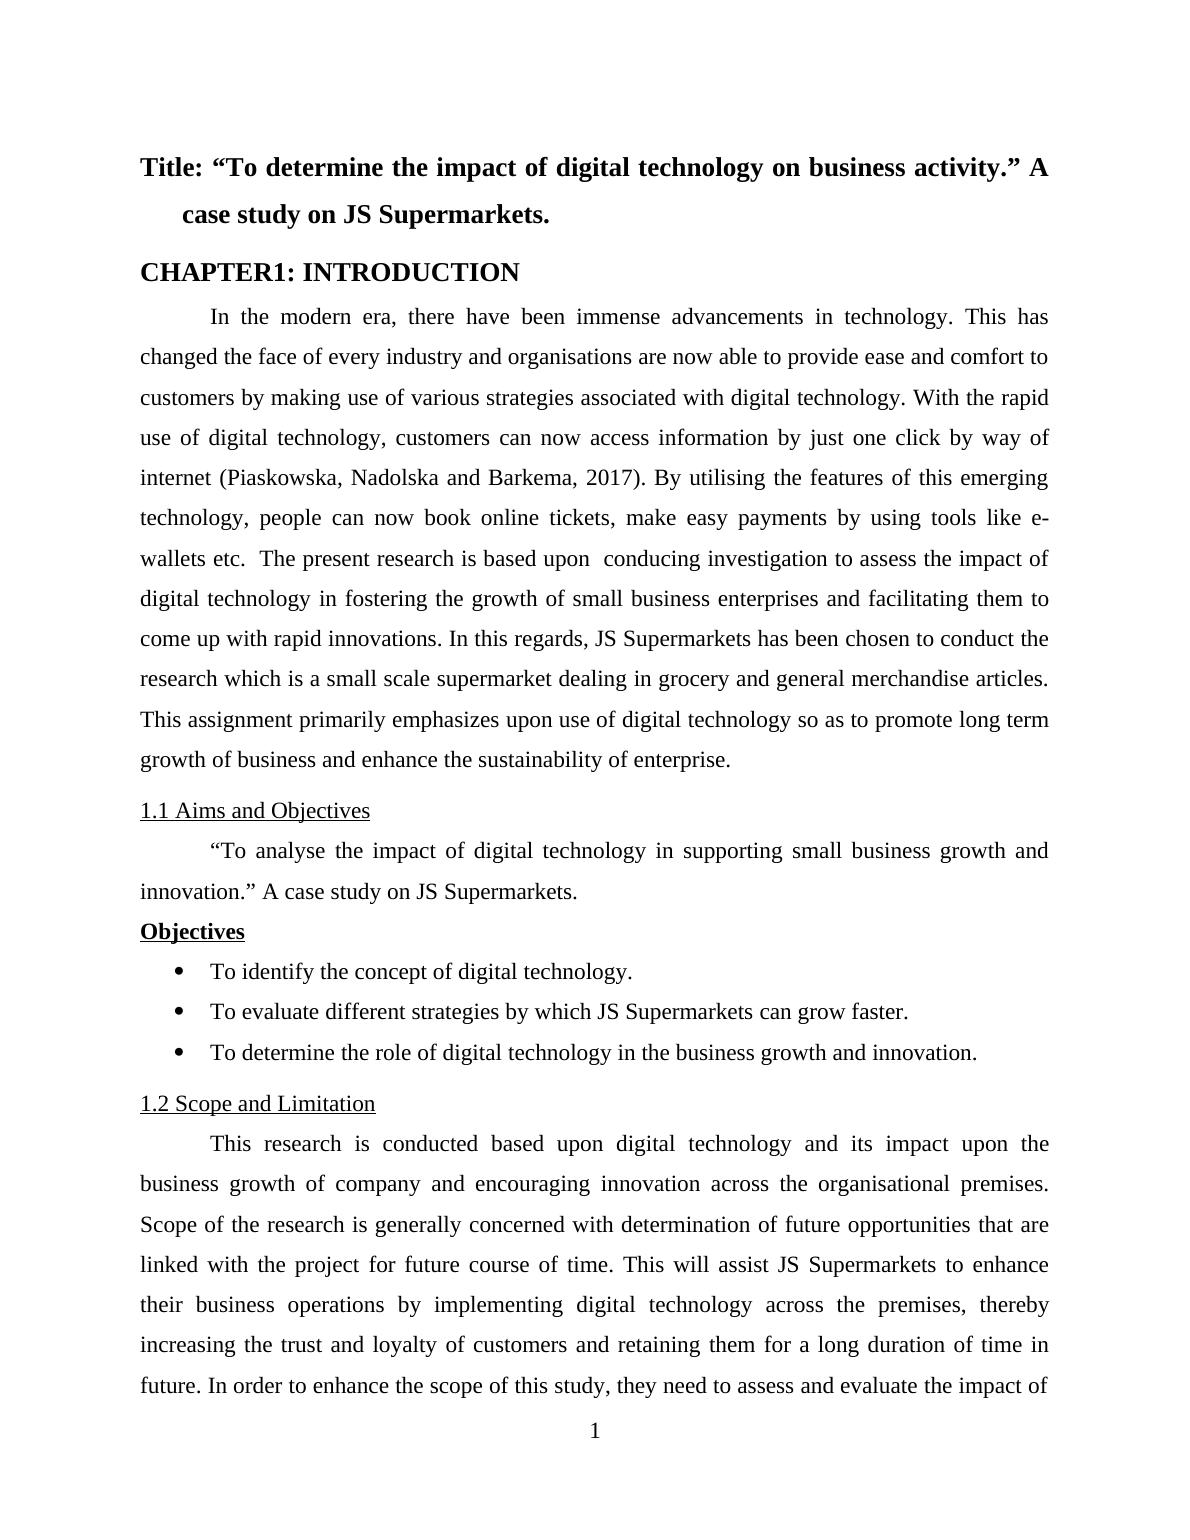 Impact of Digital Technology on Business Activity : Case Study_3